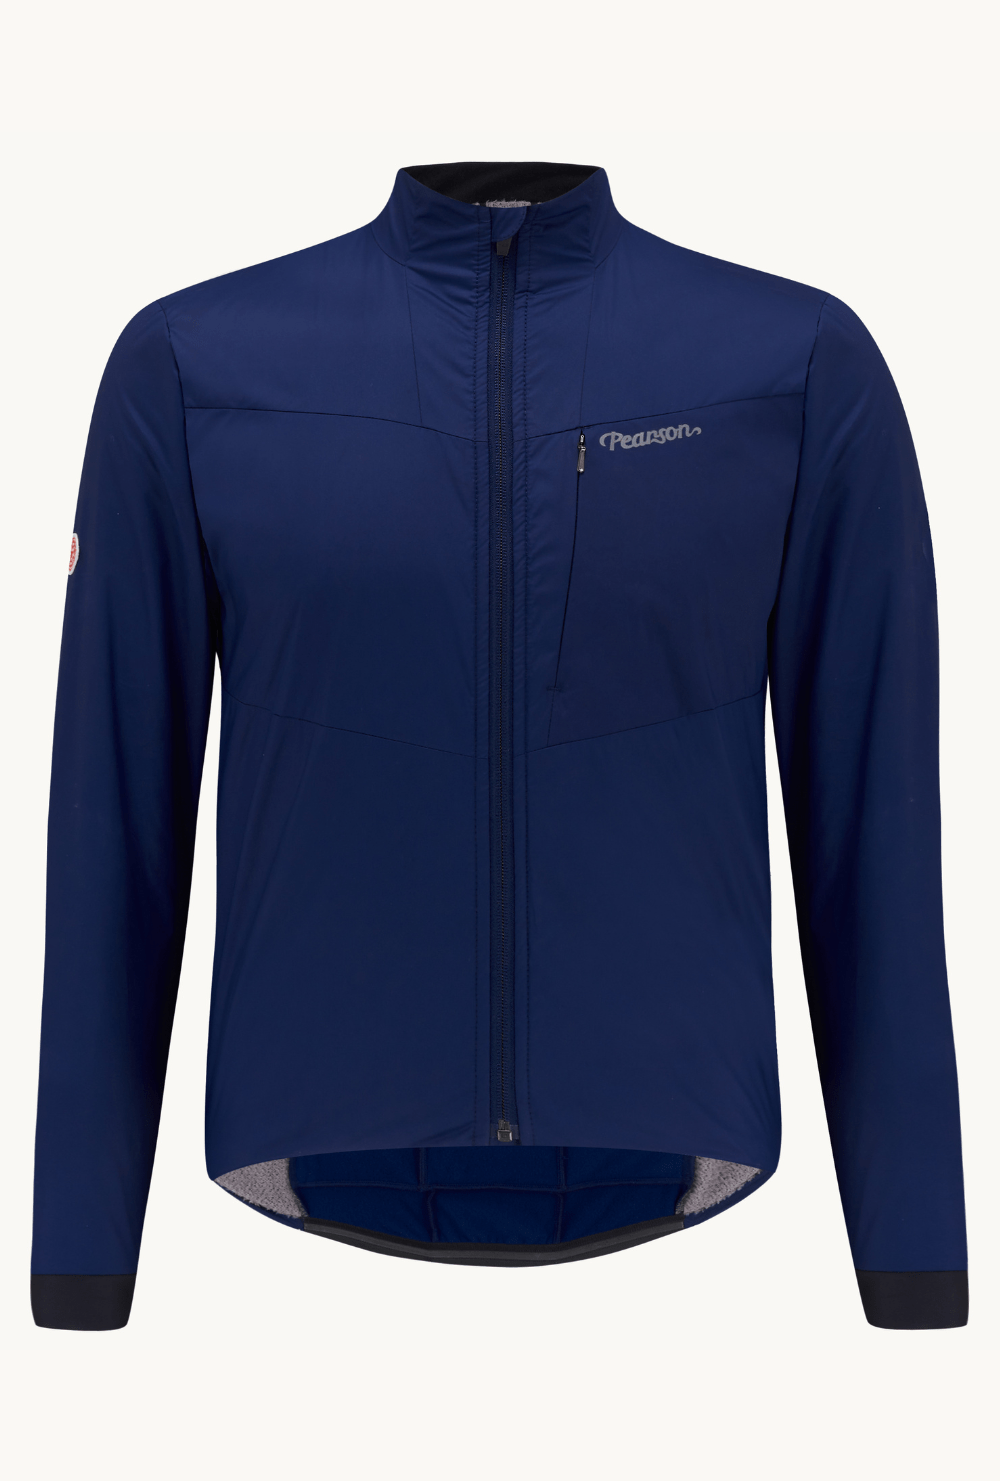 Pearson 1860  Test Your Mettle - Road Insulated Jacket Blue Ink  Blue Ink / Small